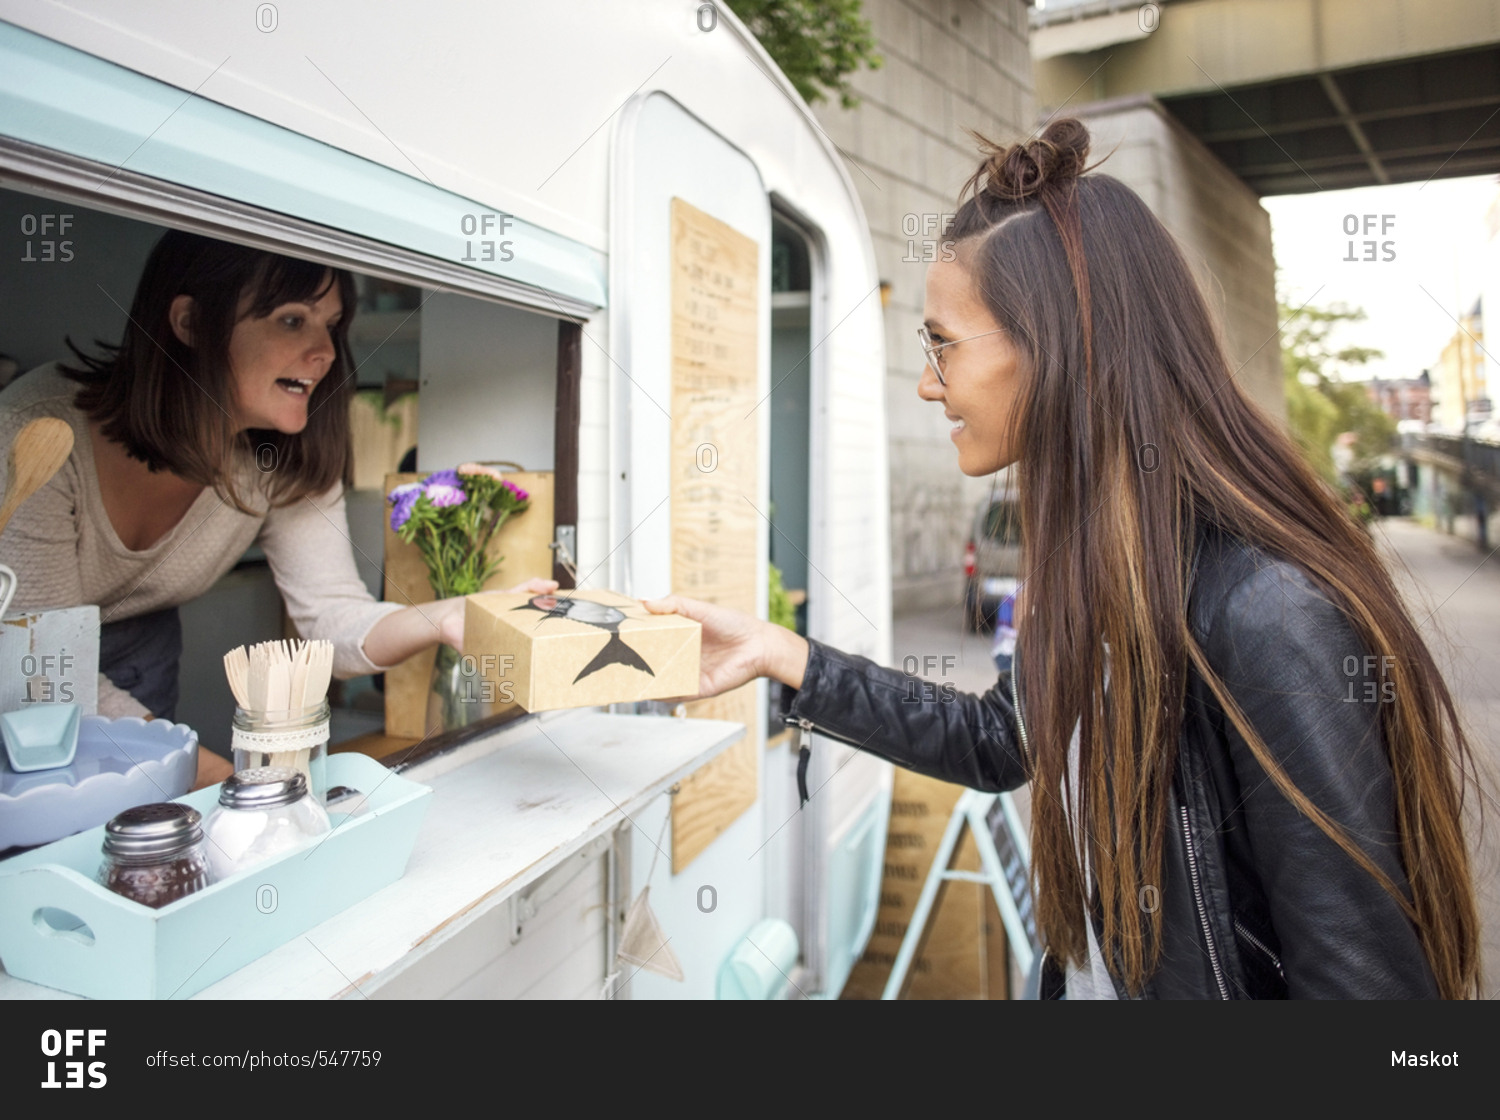 Side view of woman buying food from female owner at food truck